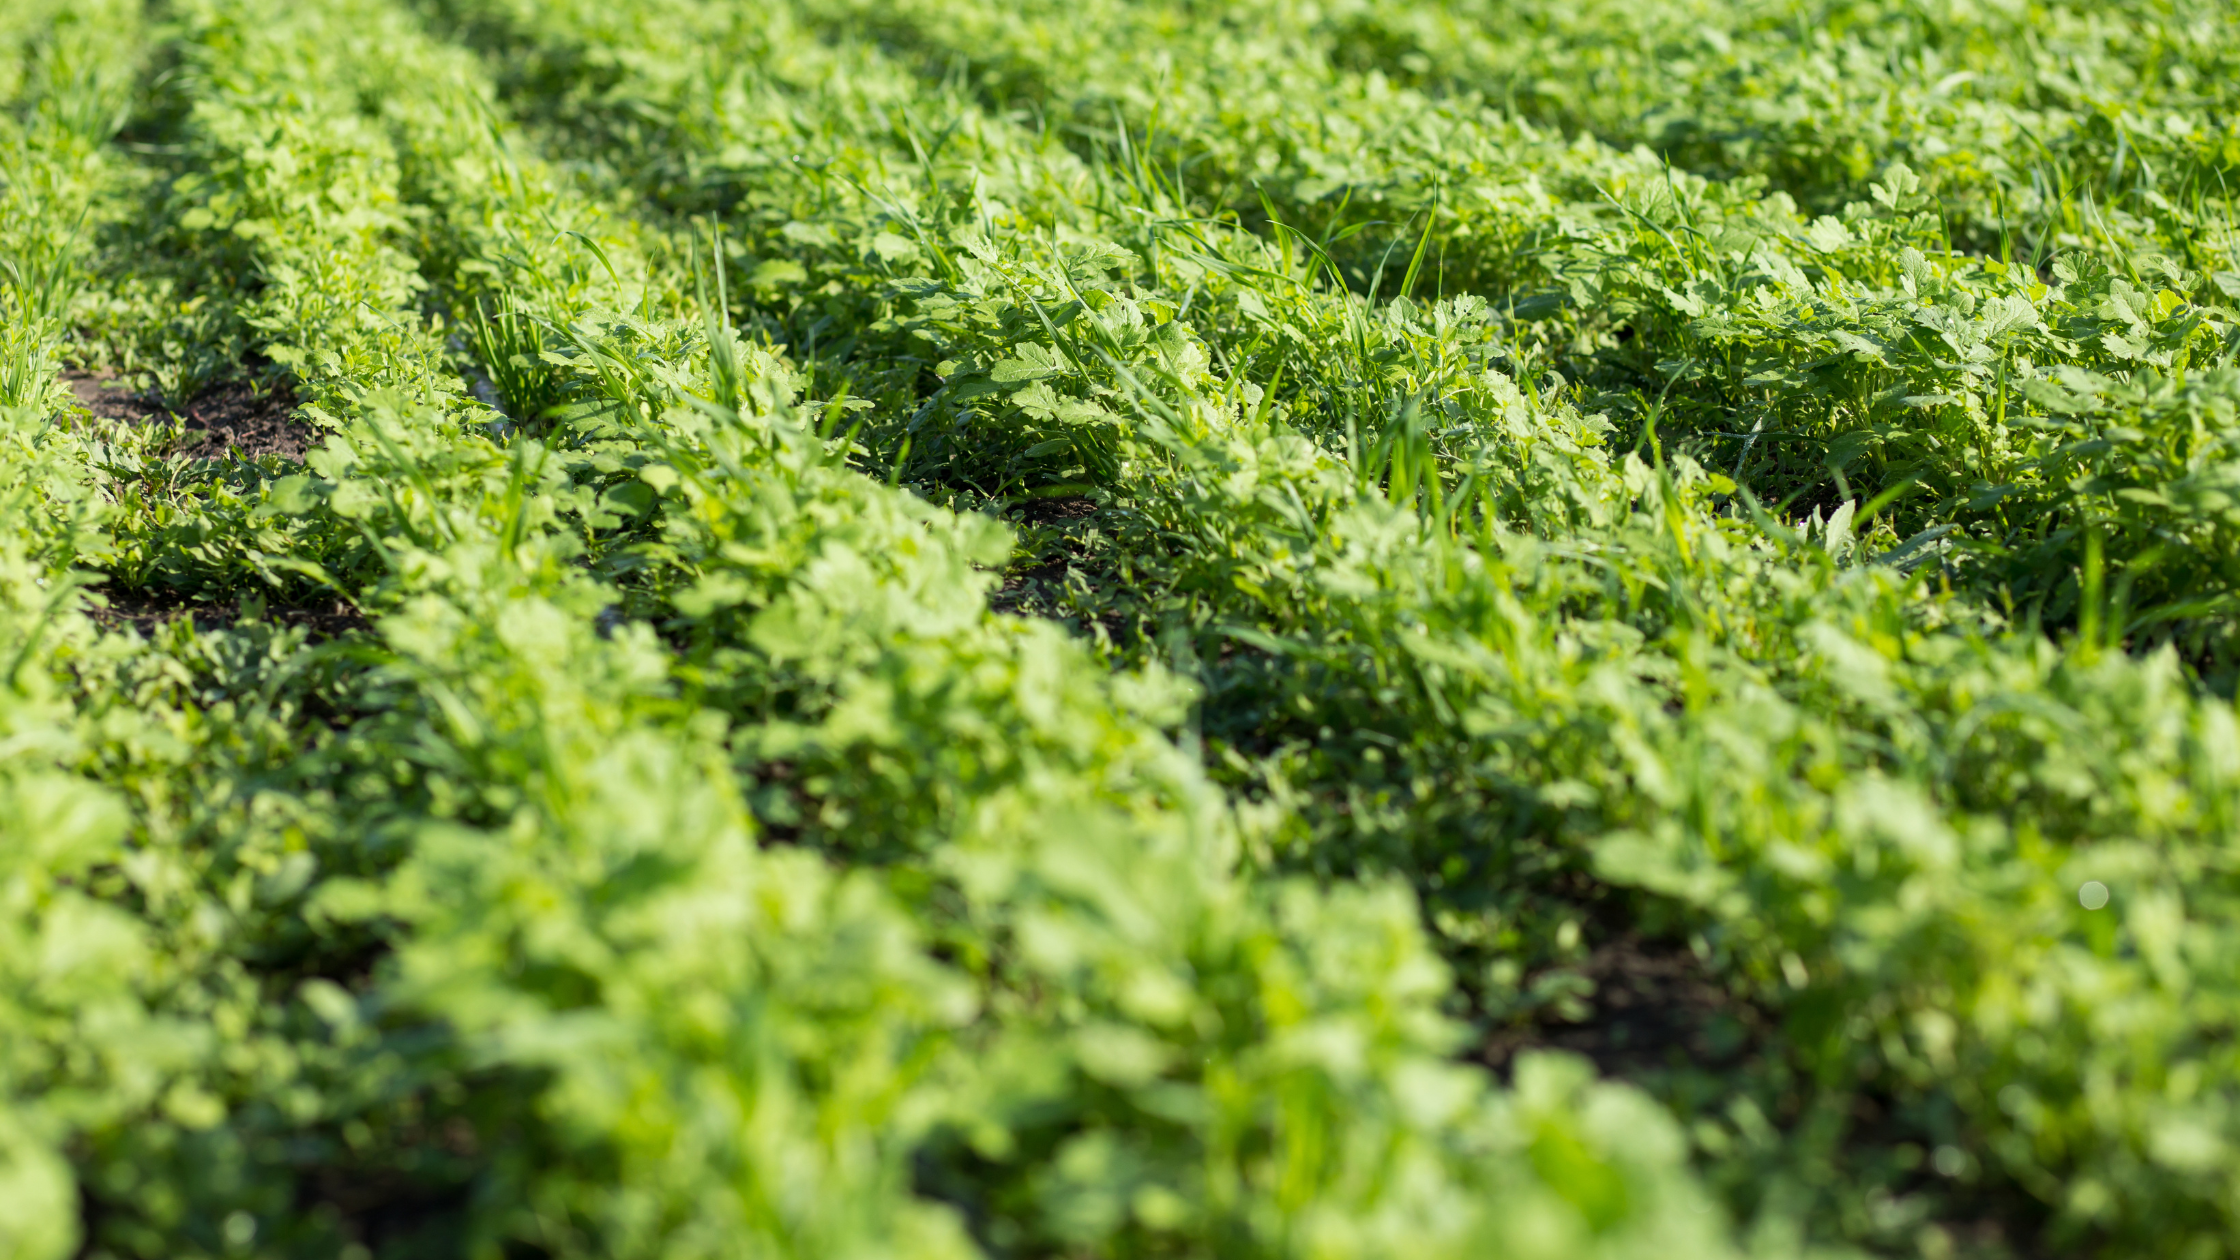 Planting Cover Crops – Get Spring Ready in the Fall